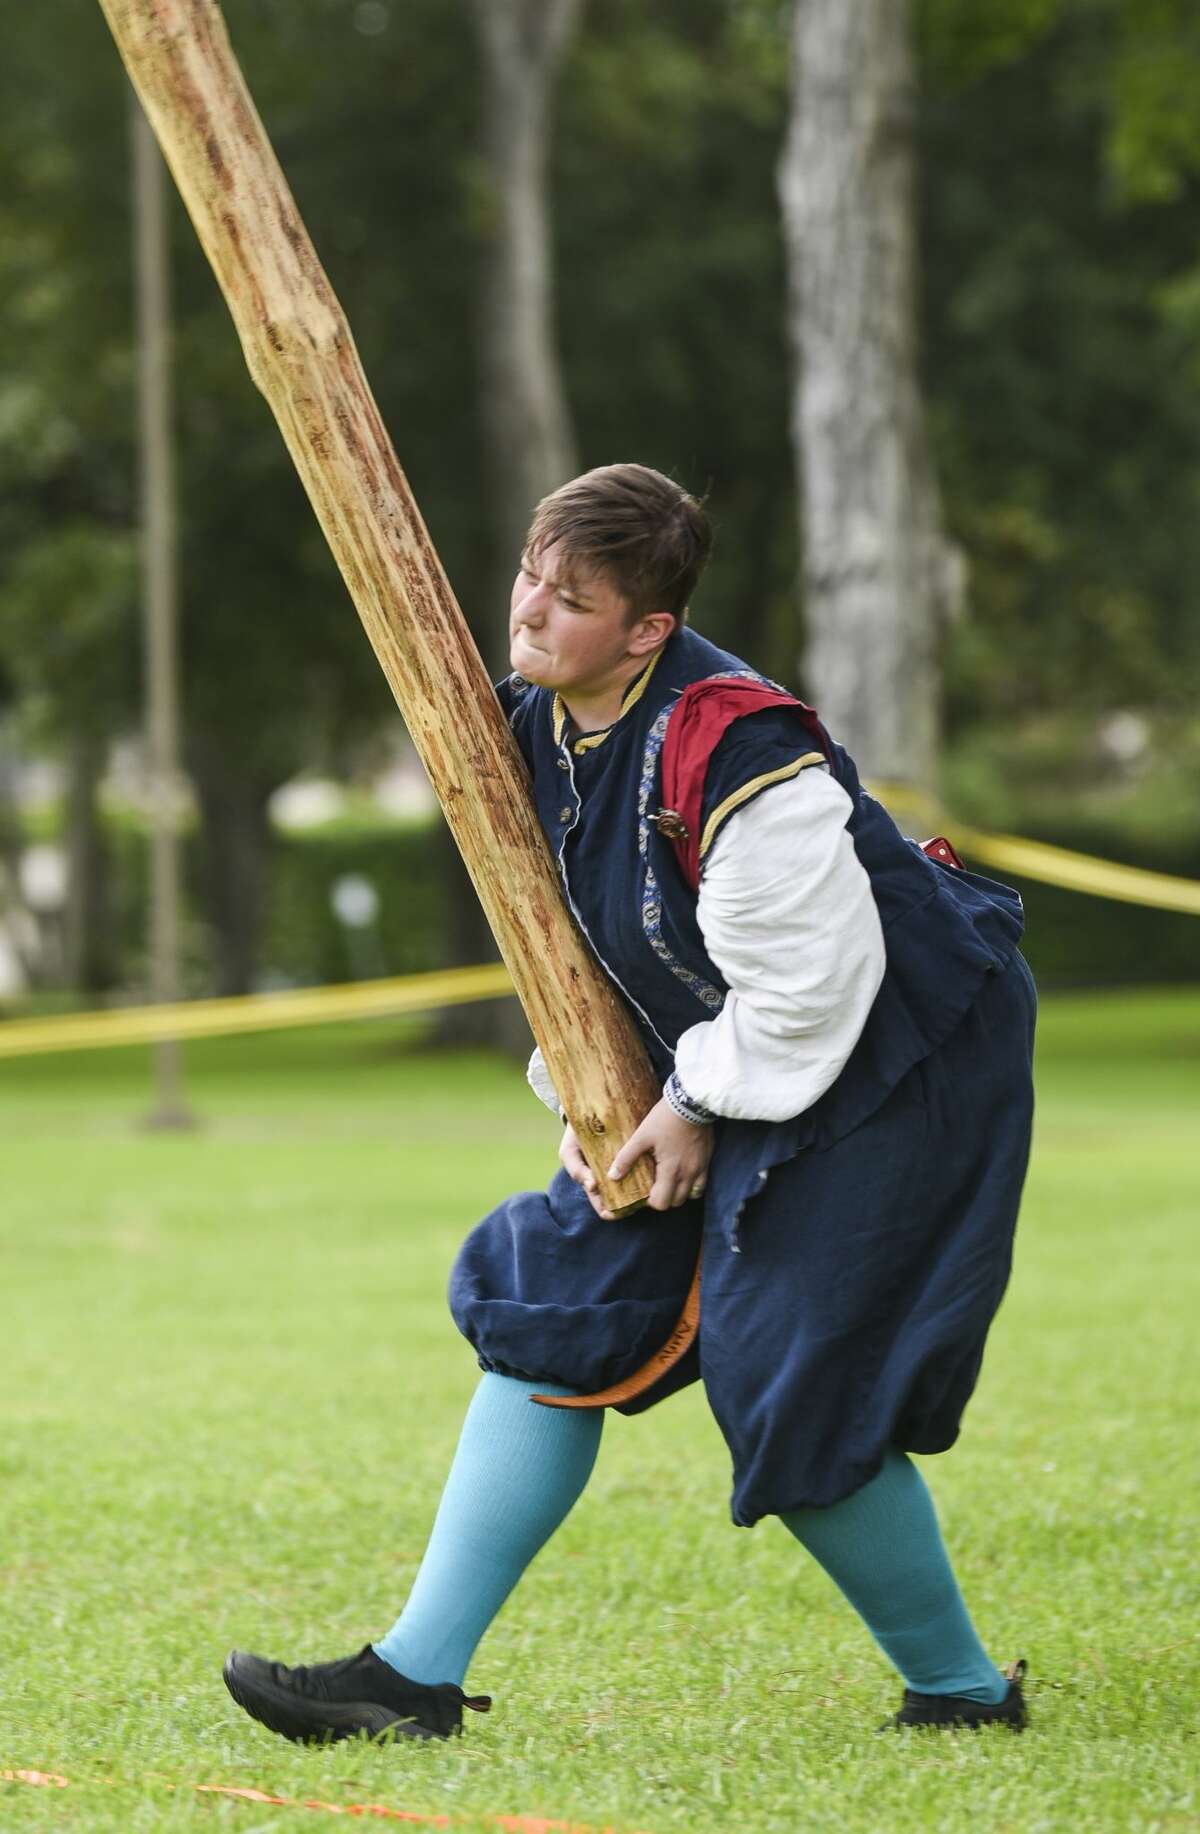 Amy Beers of Huntsville, who goes by Rosalia Del Espinar, throws a log during the caber toss event the Bordermarch Baronial Highland Games at St. Stephen's Episcopal Church Saturday afternoon. The event was put on by the Society for Creative Anachronism. The group, which is also known as SCA, research and recreate ways of life before the 17th century. Beaumont is located in the Ansteorra, Swedish for Lone Star, kingdom which includes Texas and Oklahoma. SCA members participate in many different events including making their own armor, chivalric fighting, archery and textile production. While many members choose to follow medieval Europe ideas some choose instead vikings or samurais. Photo taken on Saturday, 06/22/19. Ryan Welch/The Enterprise